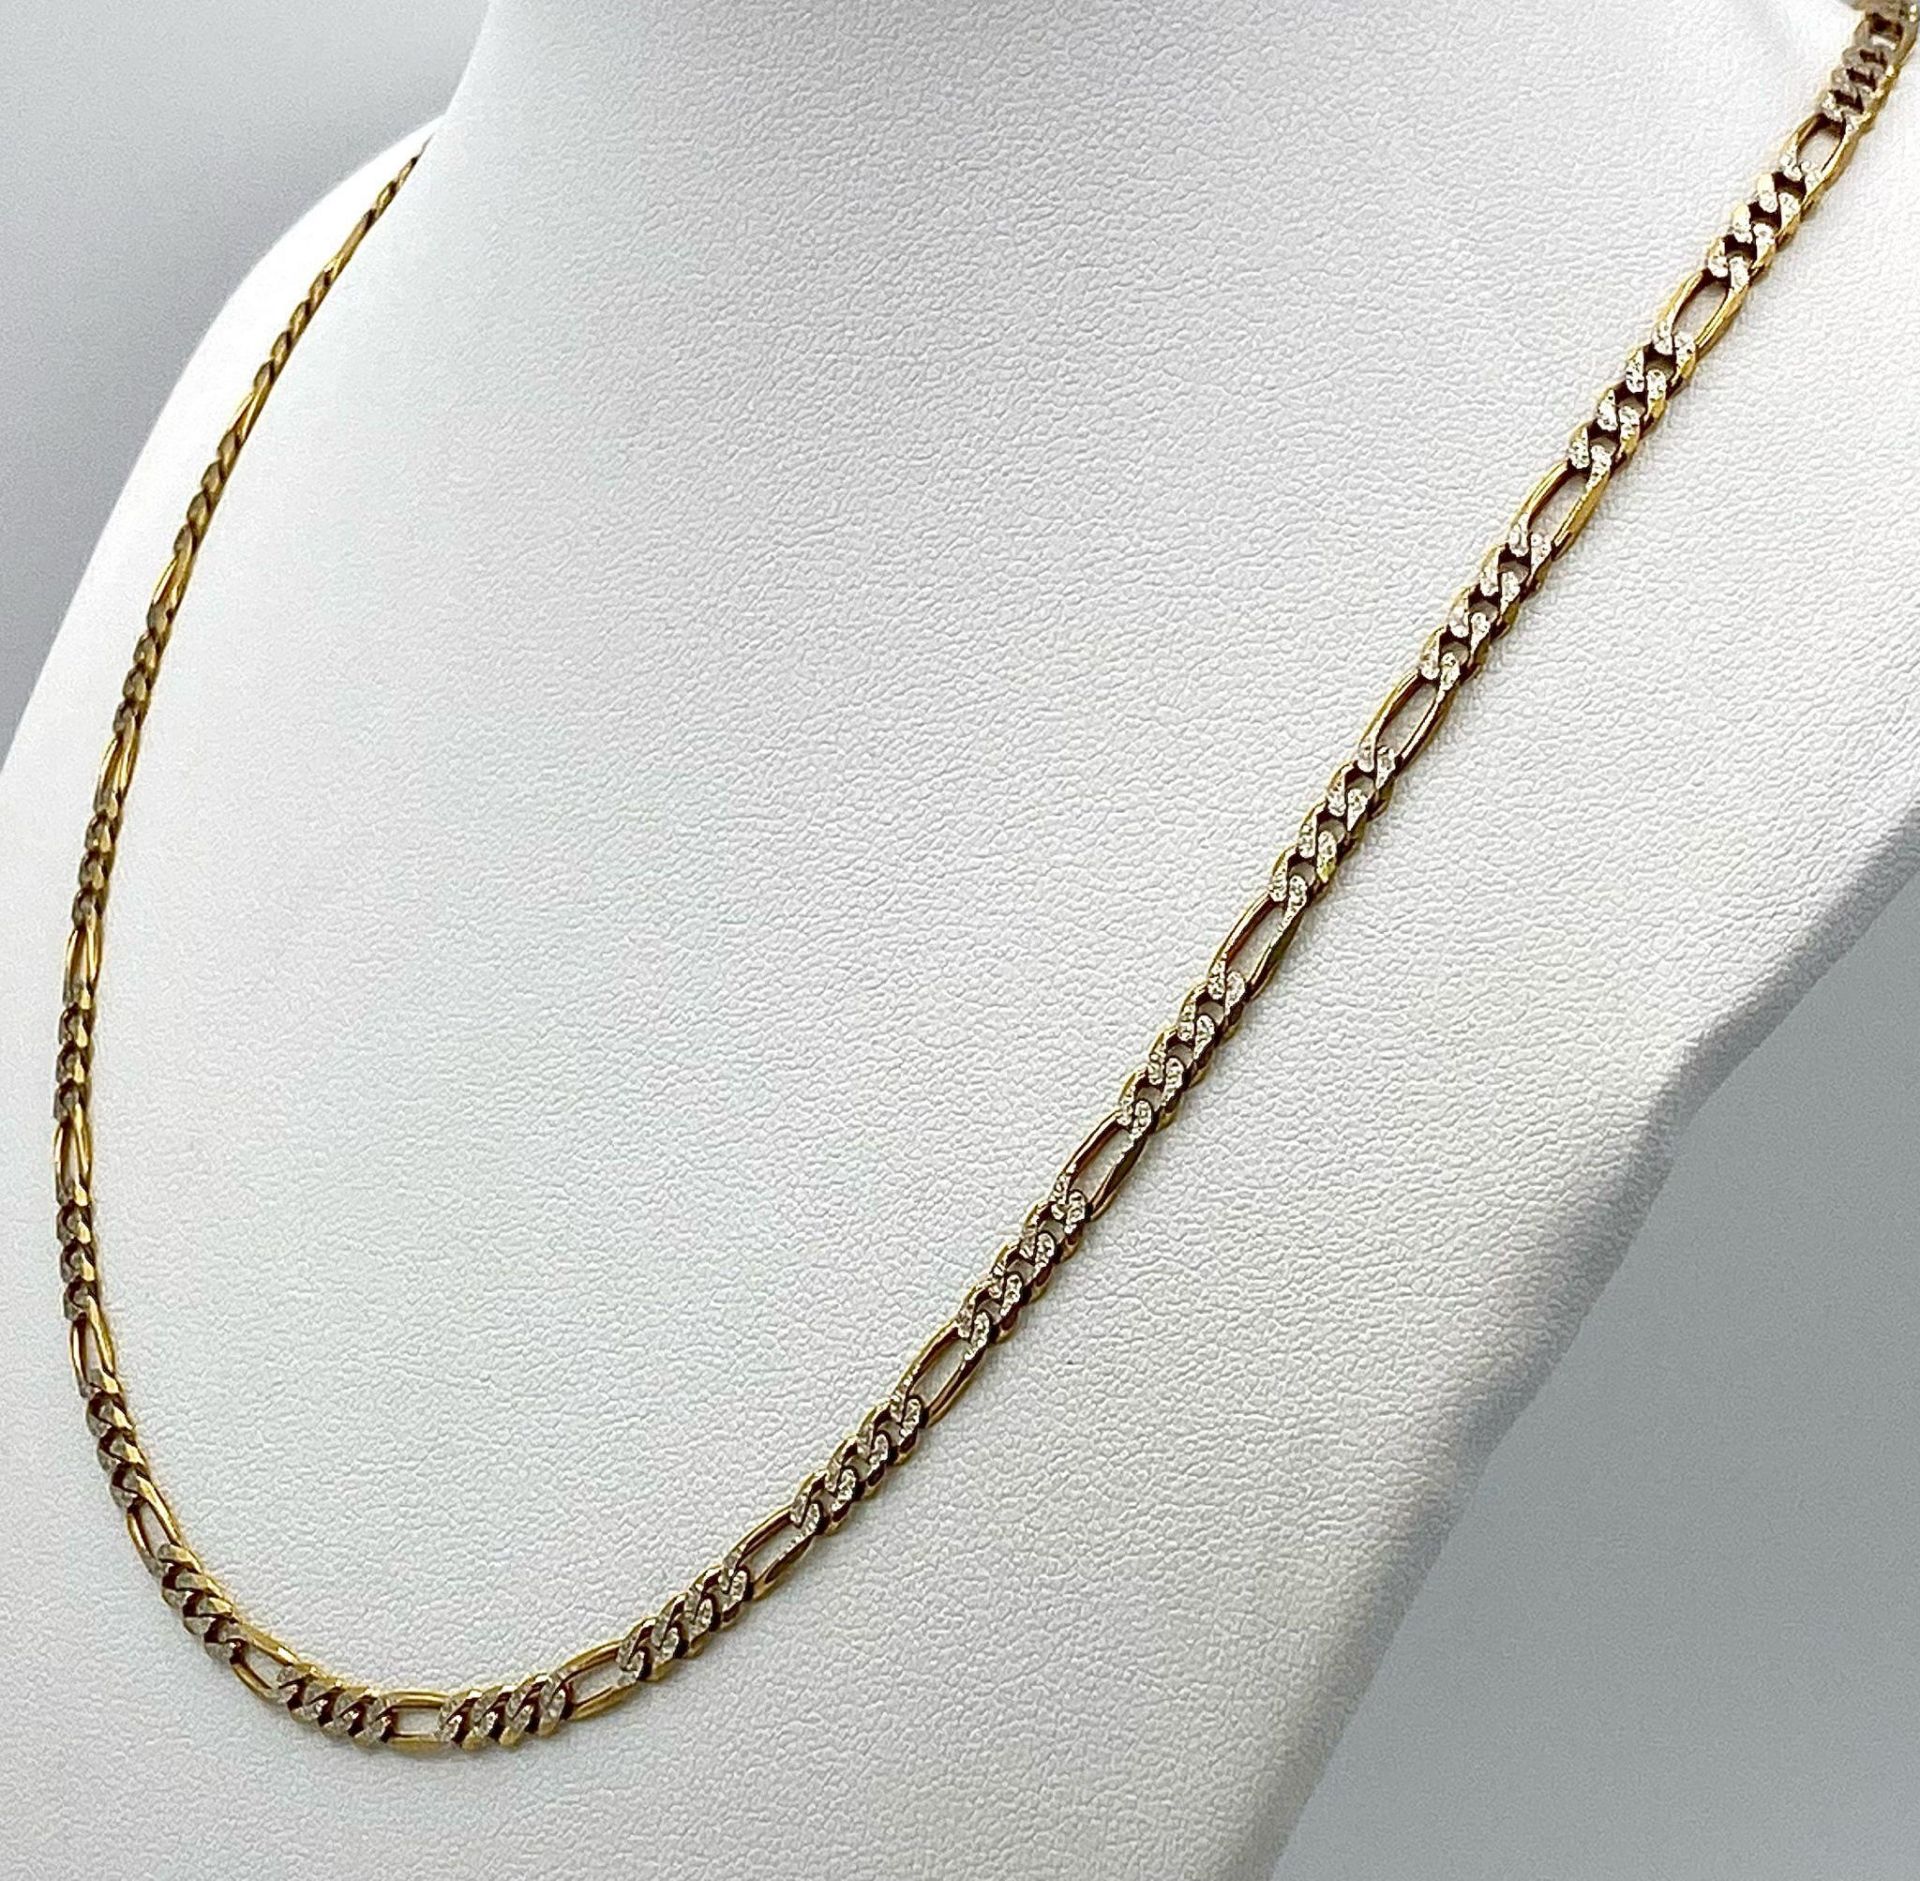 A 9K Yellow and White Gold Italian Figaro Link Necklace. 45cm length. 8.82g weight. - Image 3 of 7